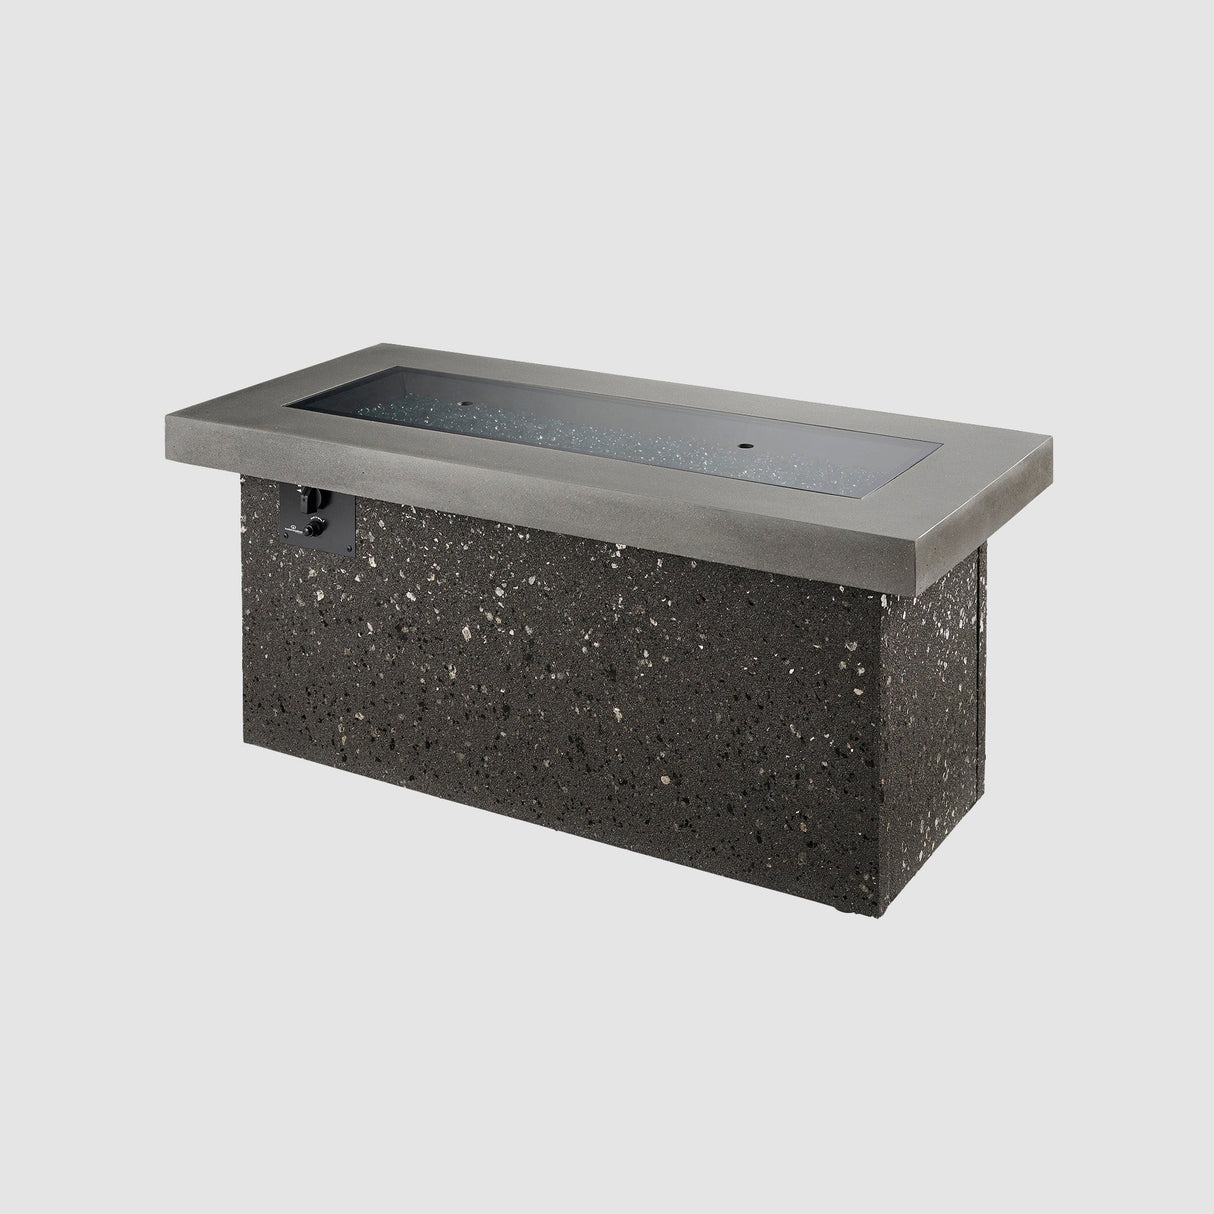 Midnight Mist Key Largo Linear Gas Fire Pit Table with its cover placed on top on a grey background